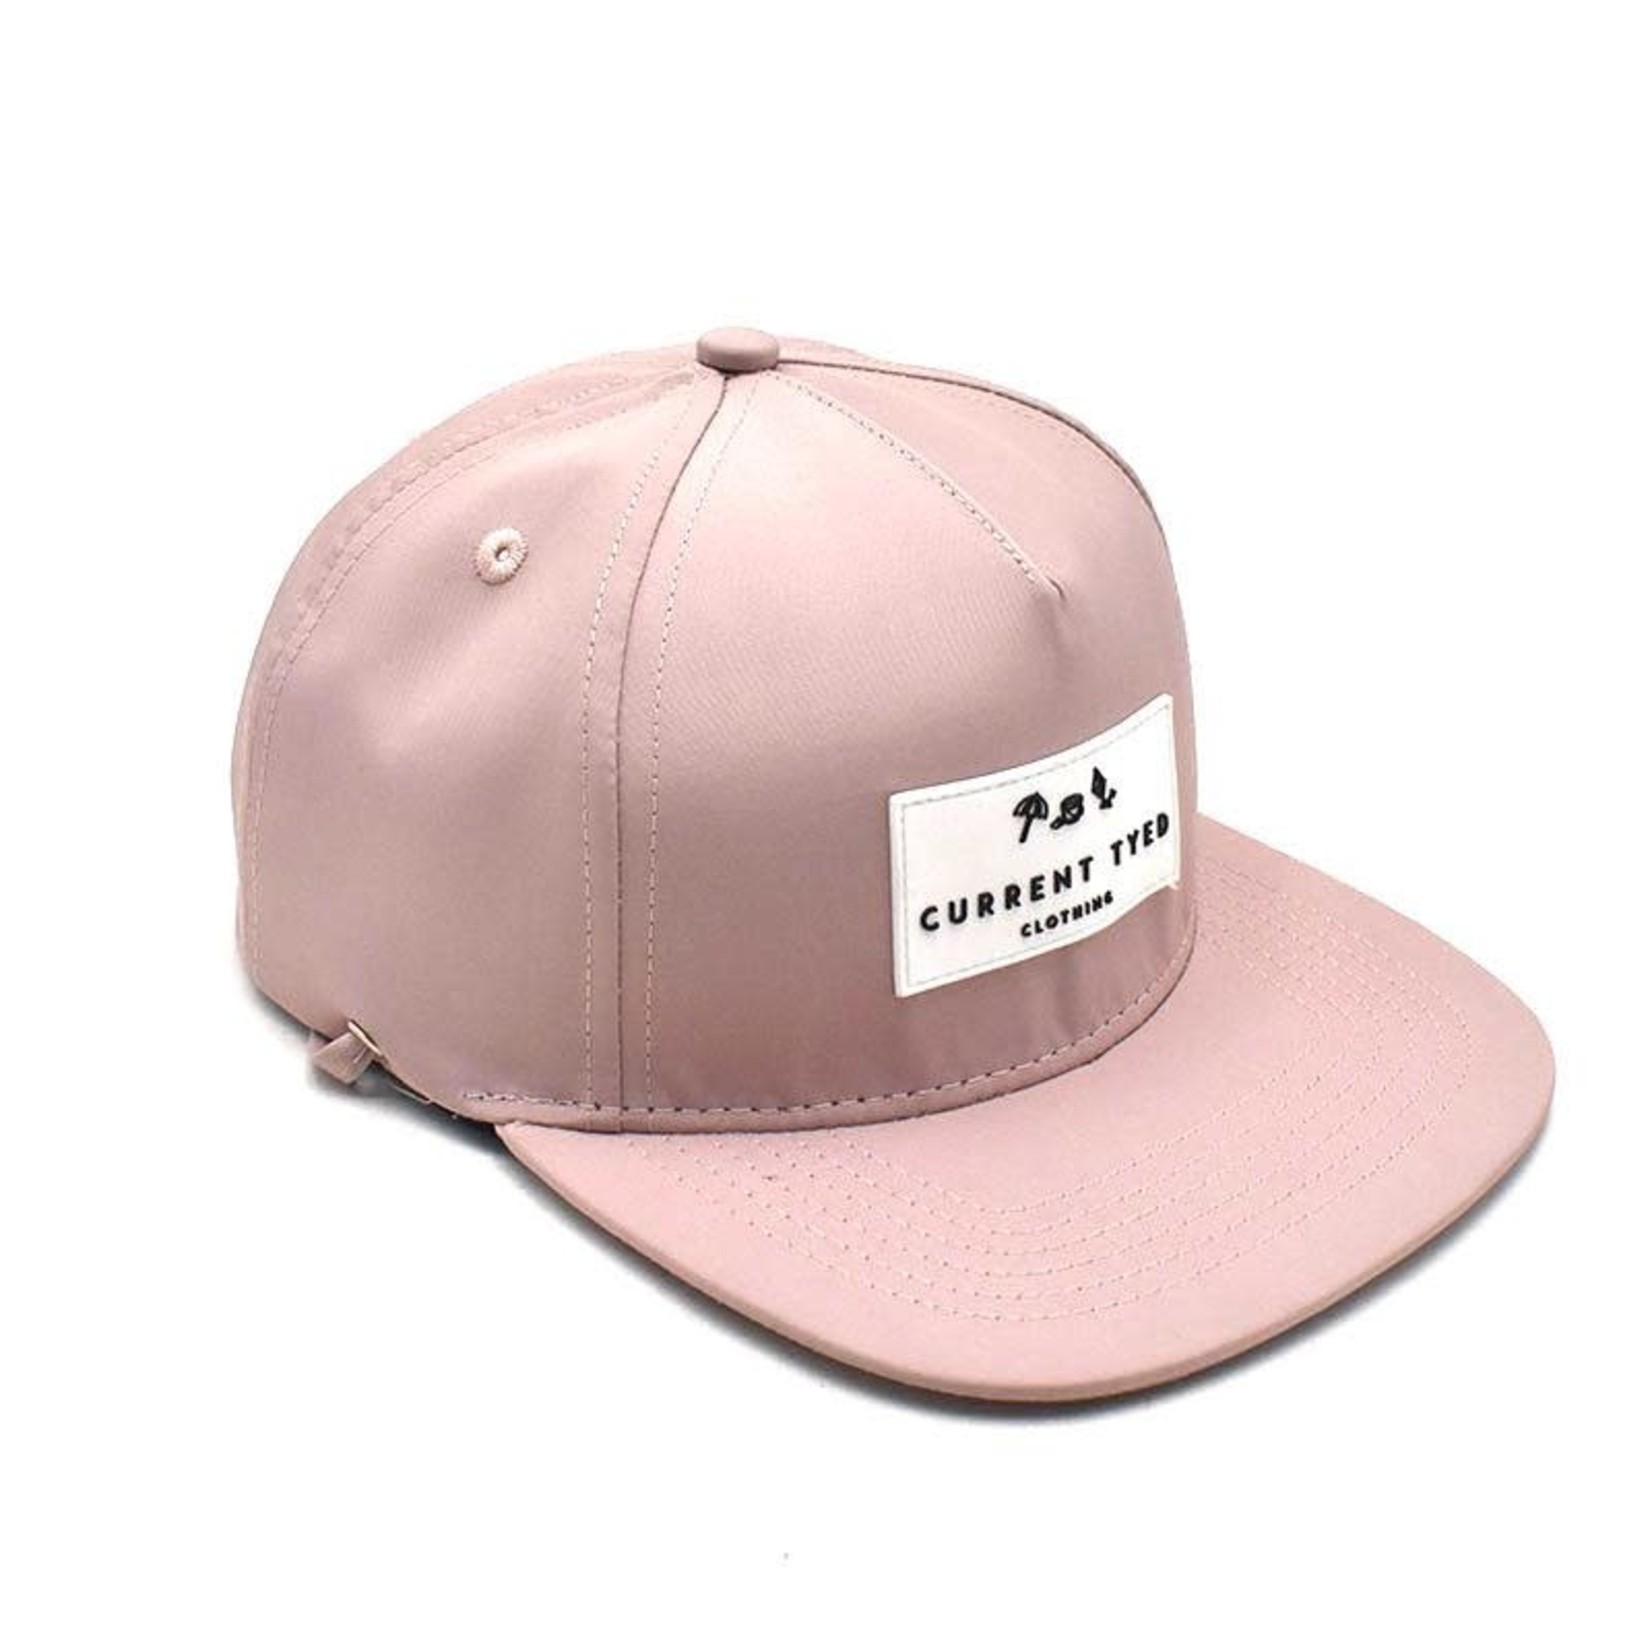 Current Tyed Current Tyed Waterproof Snapback - Champagne